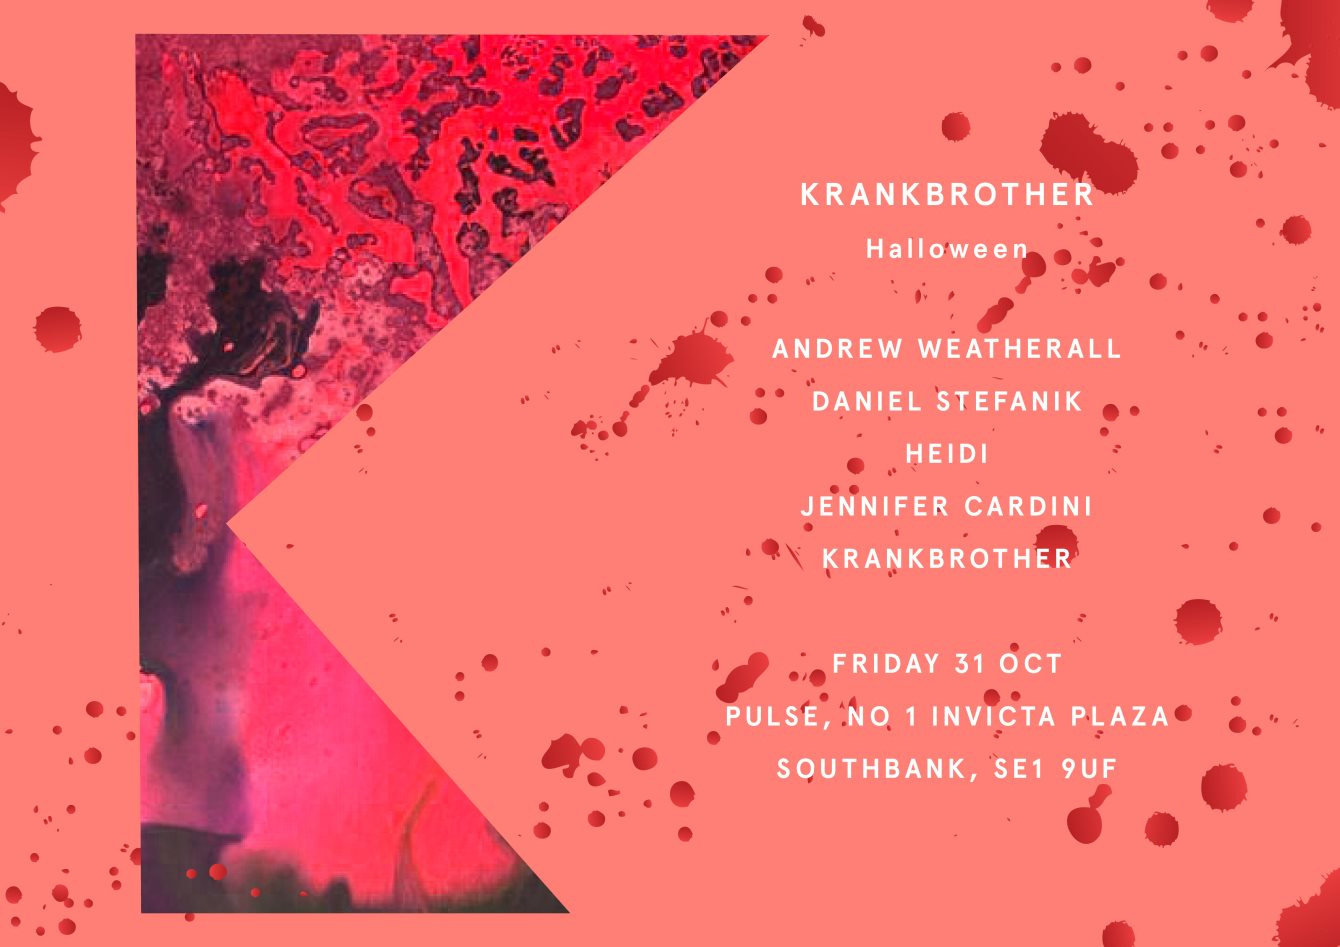 Krankbrother presents Halloween with Andrew Weatherall, Heidi and Jennifer Cardini - Flyer front